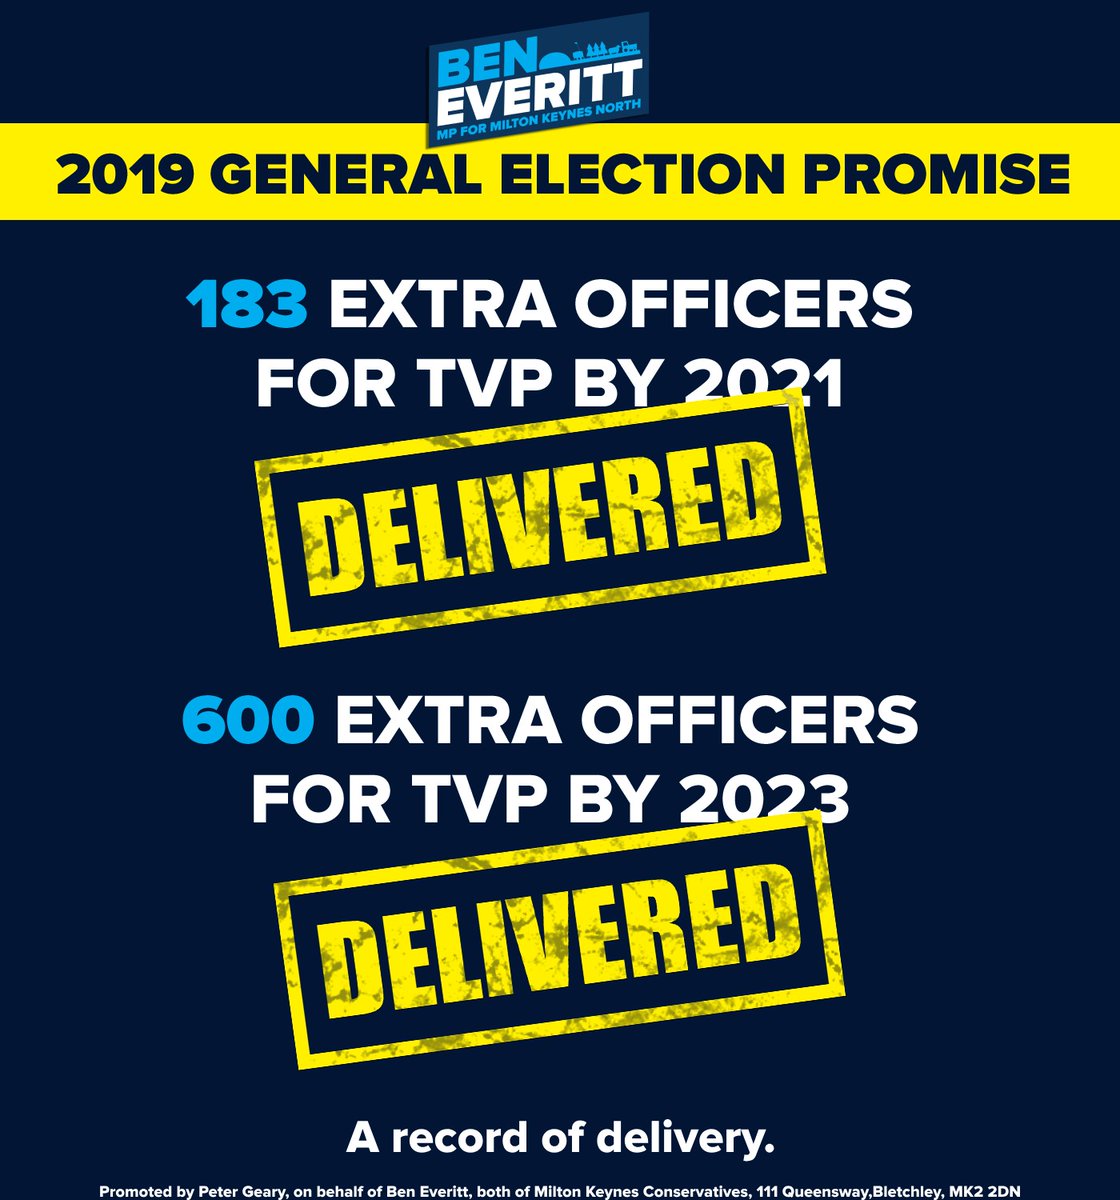 I made a promise in 2019 that we would deliver more police officers. We've smashed our target. TVP has 870 more officers than in 2019. And more officers than ever before. We delivered.